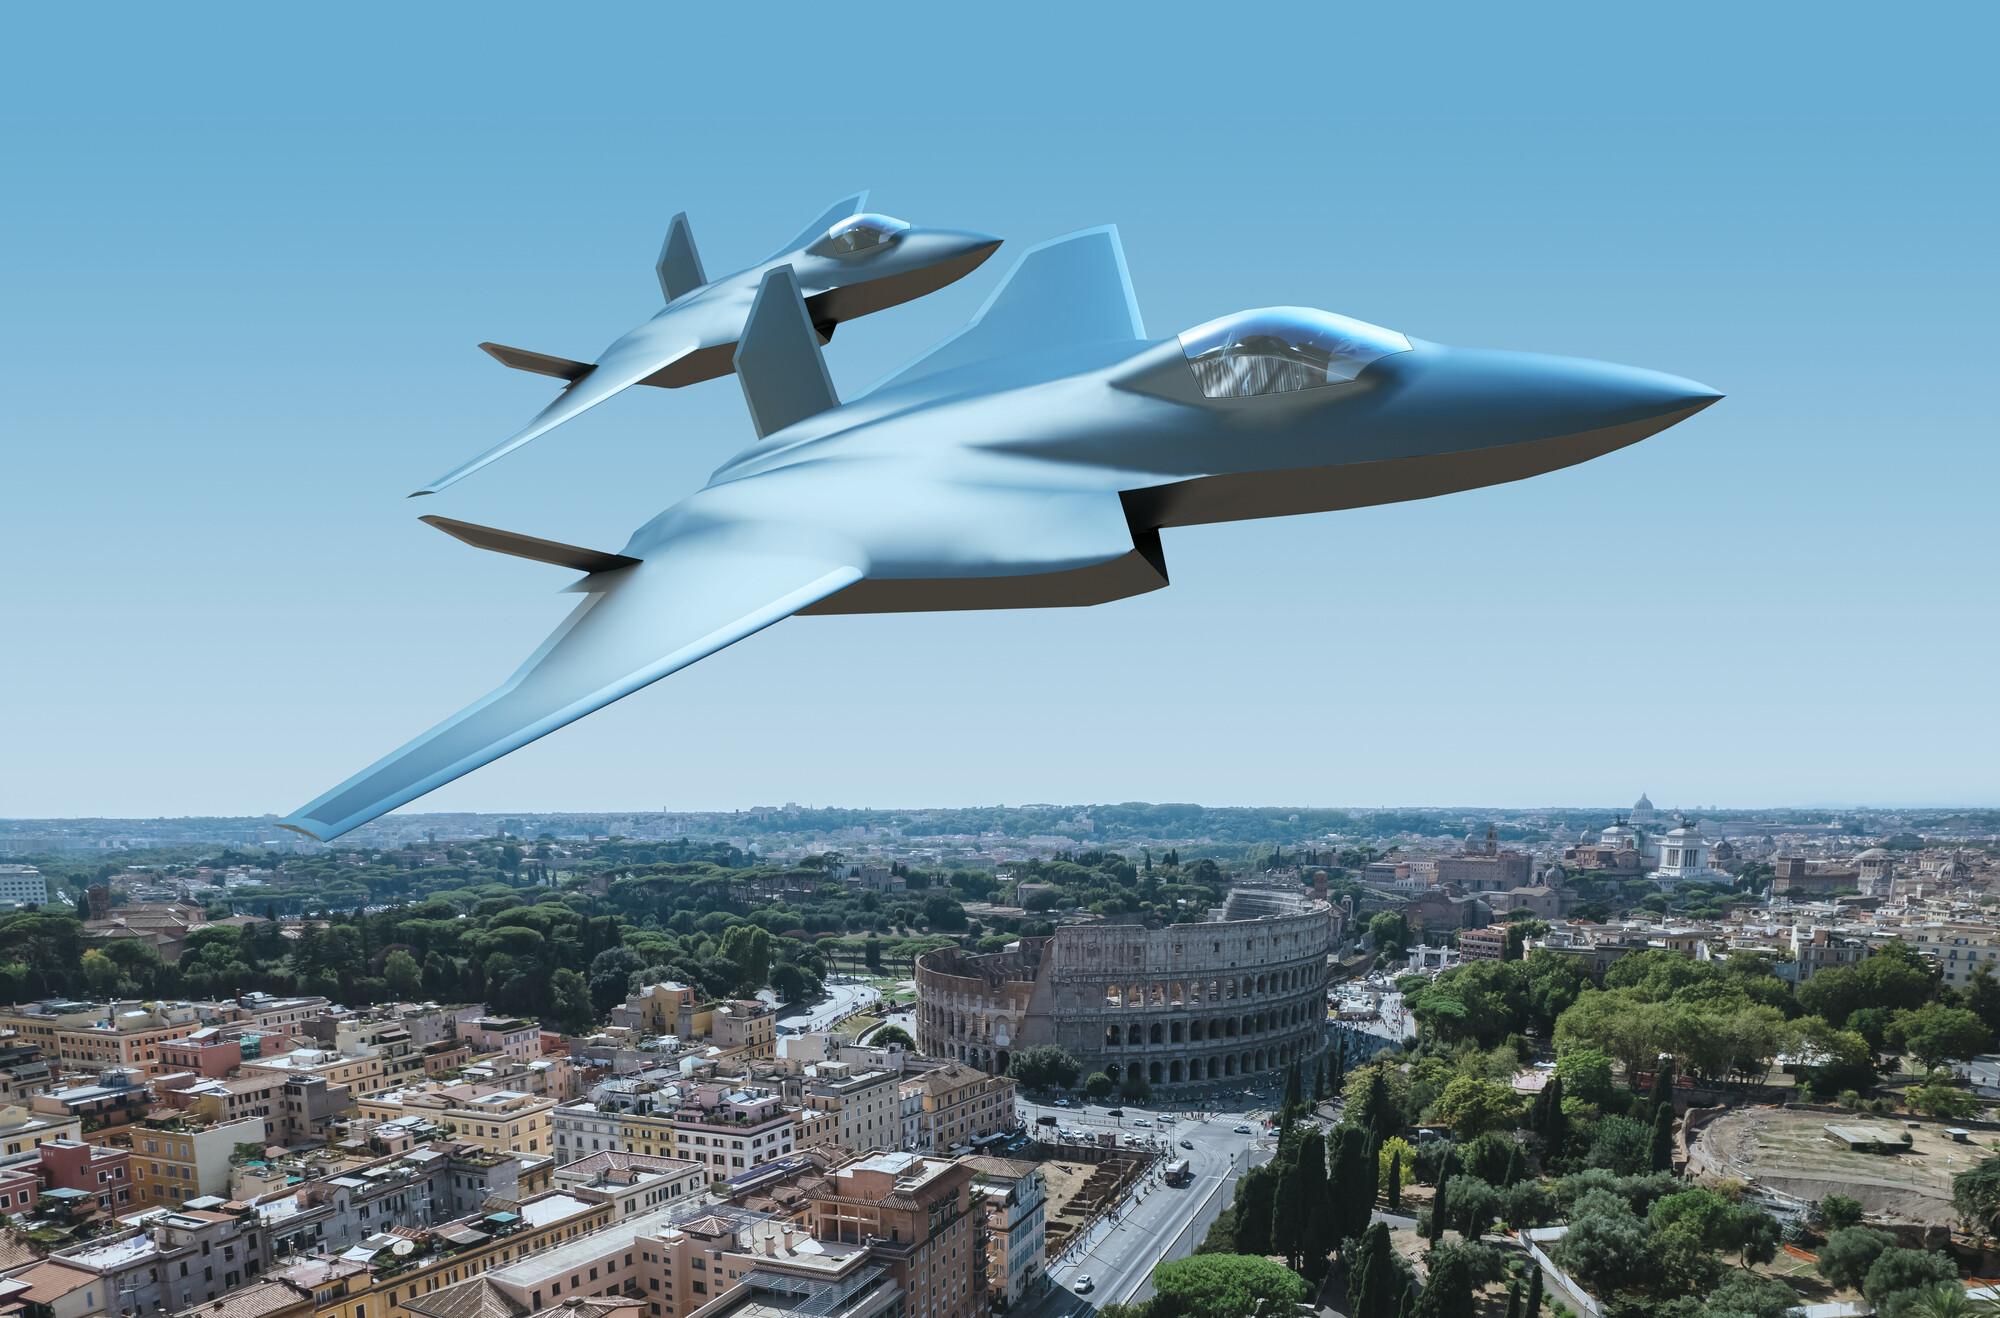 Italy will invest more than $8bn by 2037 to develop a sixth-generation fighter jet with the UK and Japan